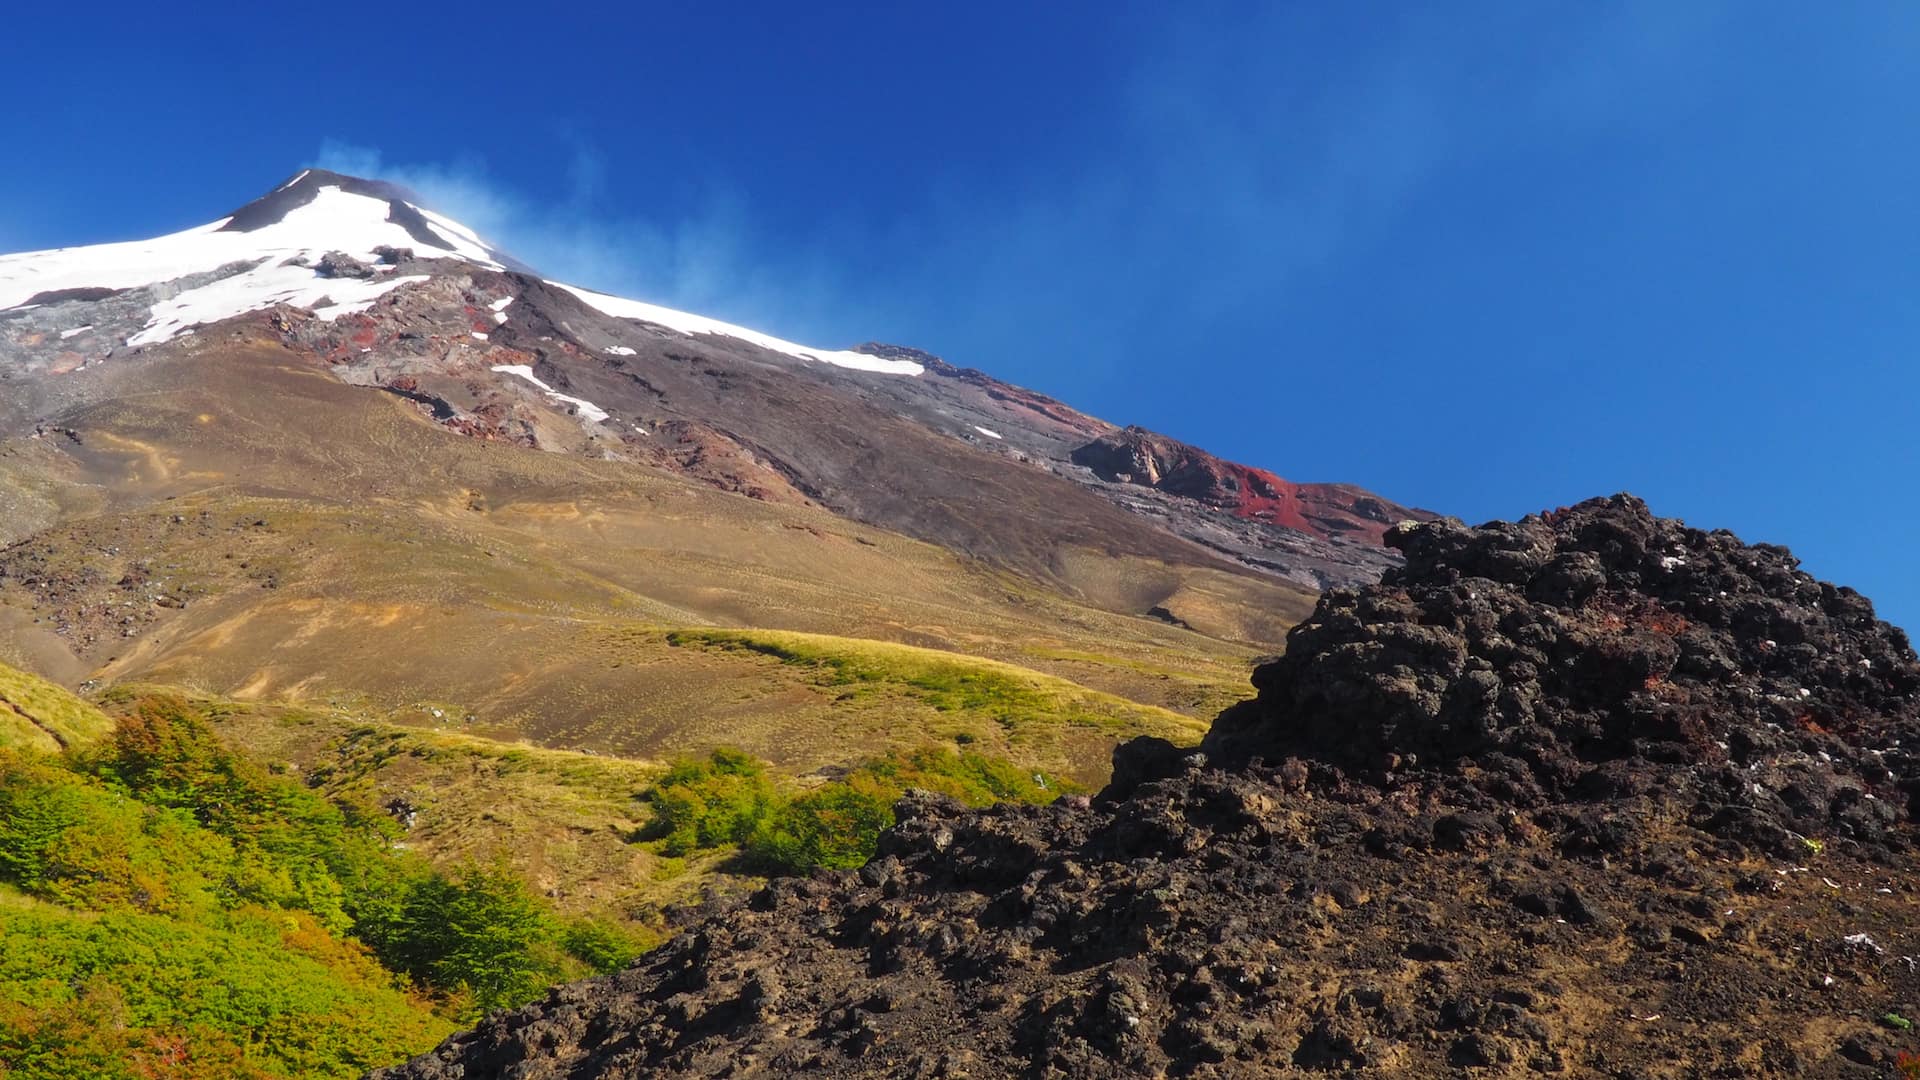 View of Volcan Villarica from the lava field